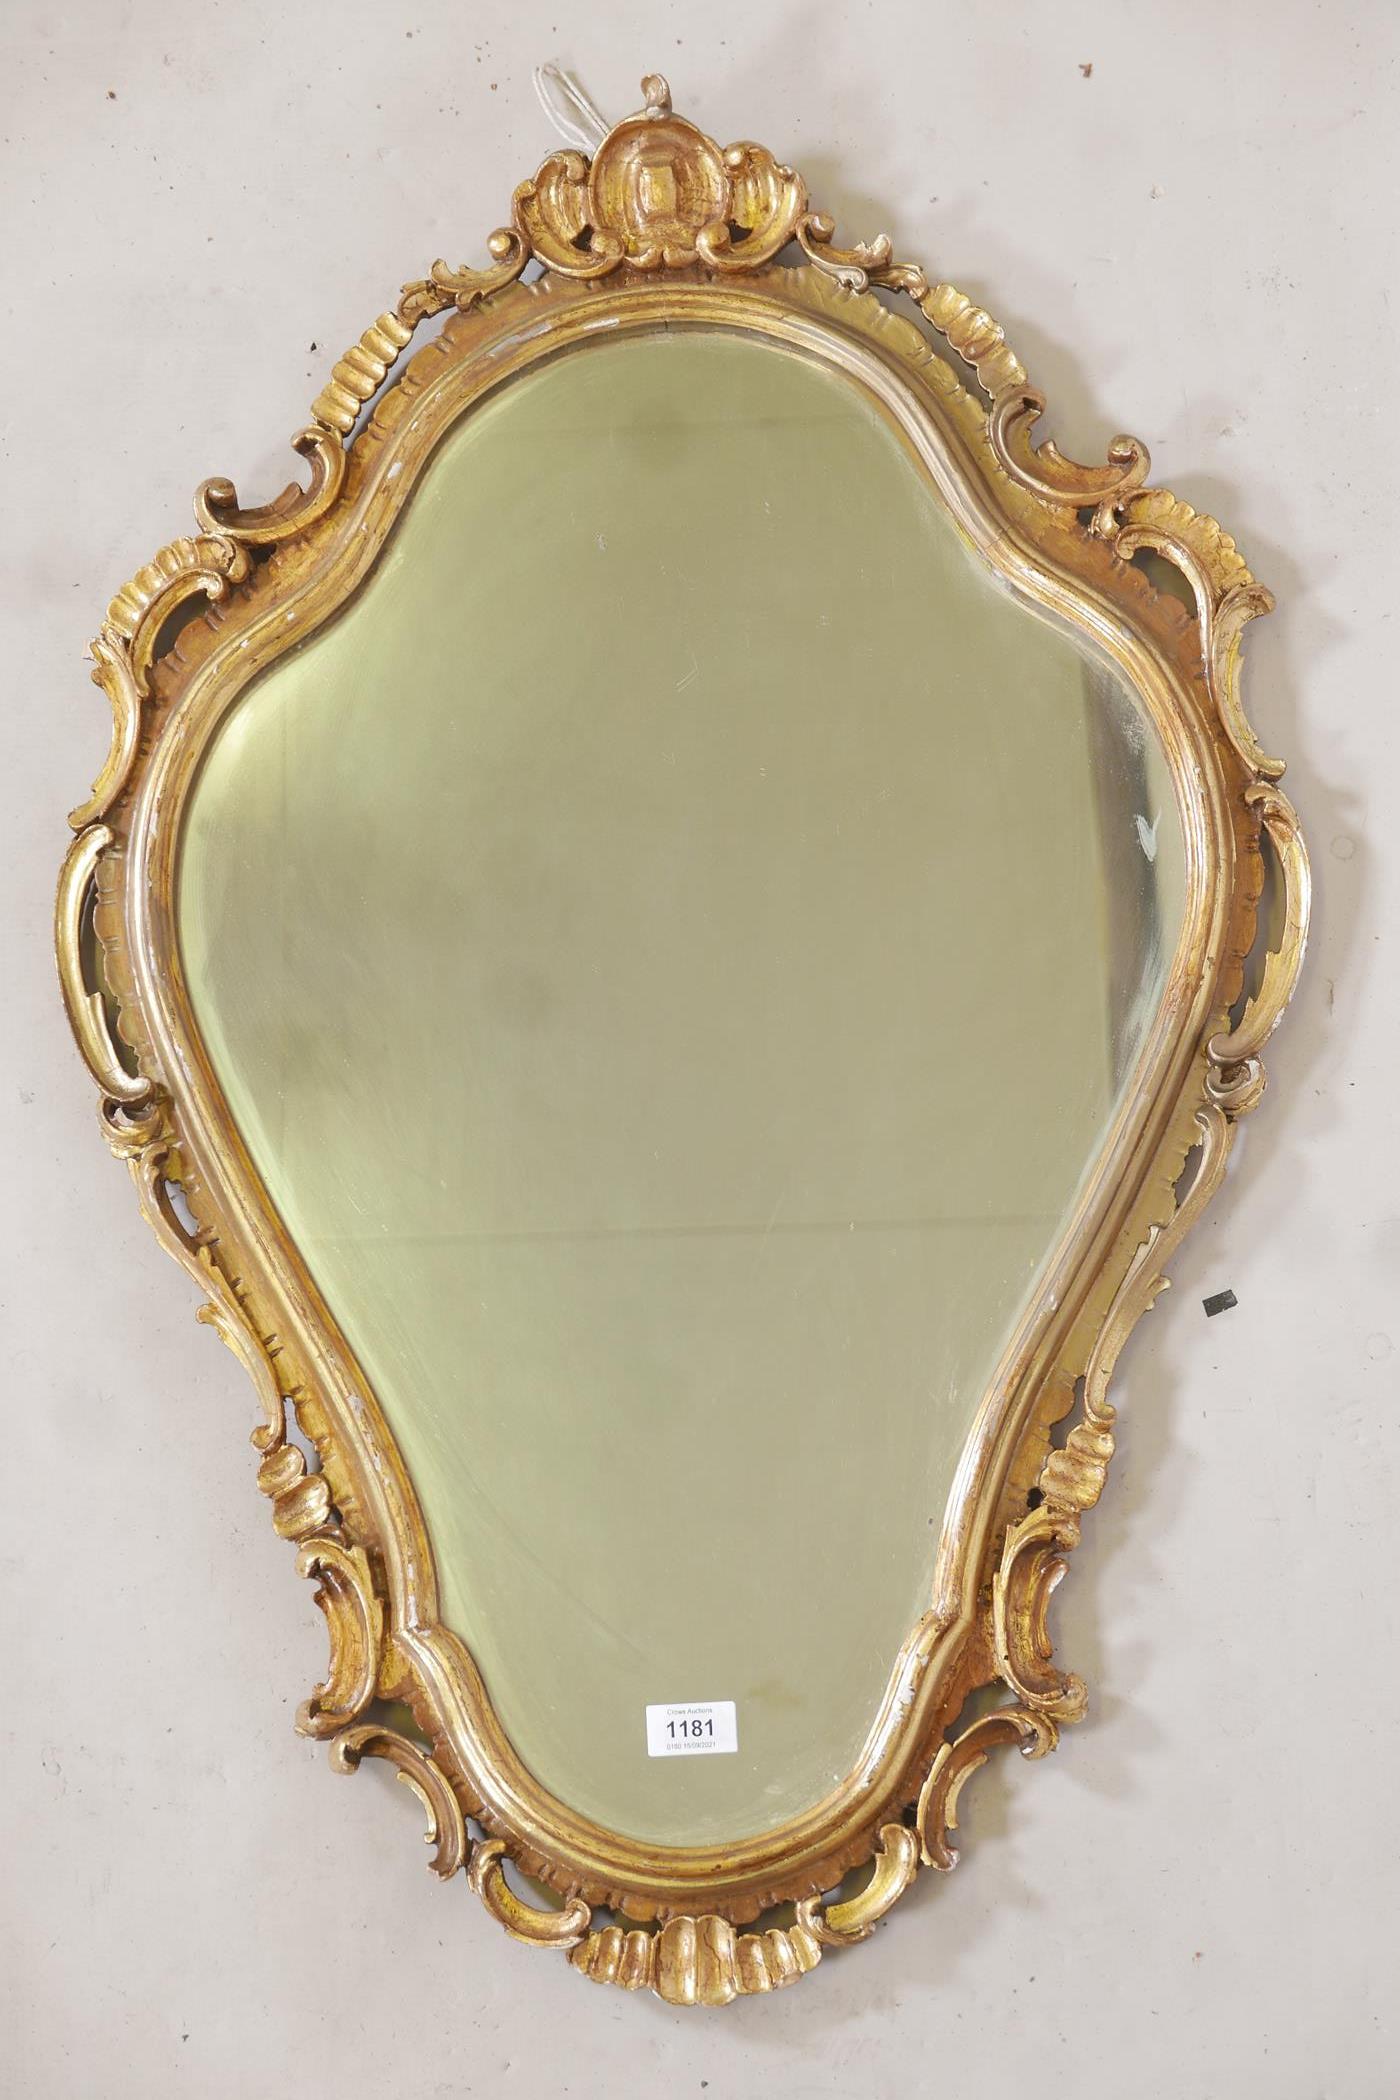 A carved and pierced giltwood rococo style wall mirror, early C20th, 35" long